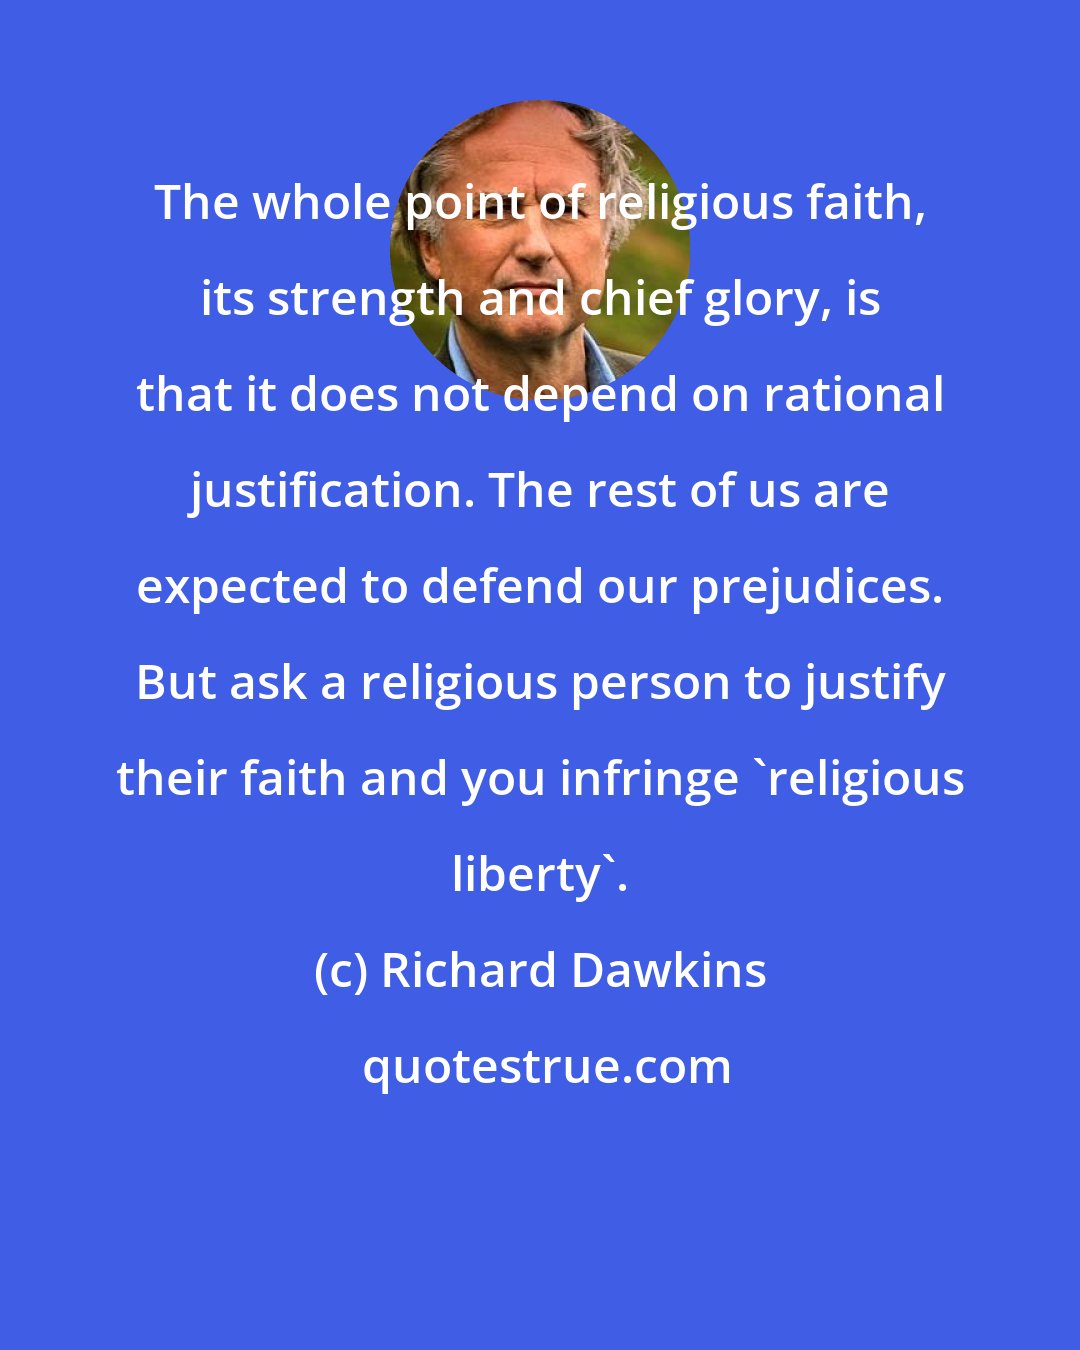 Richard Dawkins: The whole point of religious faith, its strength and chief glory, is that it does not depend on rational justification. The rest of us are expected to defend our prejudices. But ask a religious person to justify their faith and you infringe 'religious liberty'.